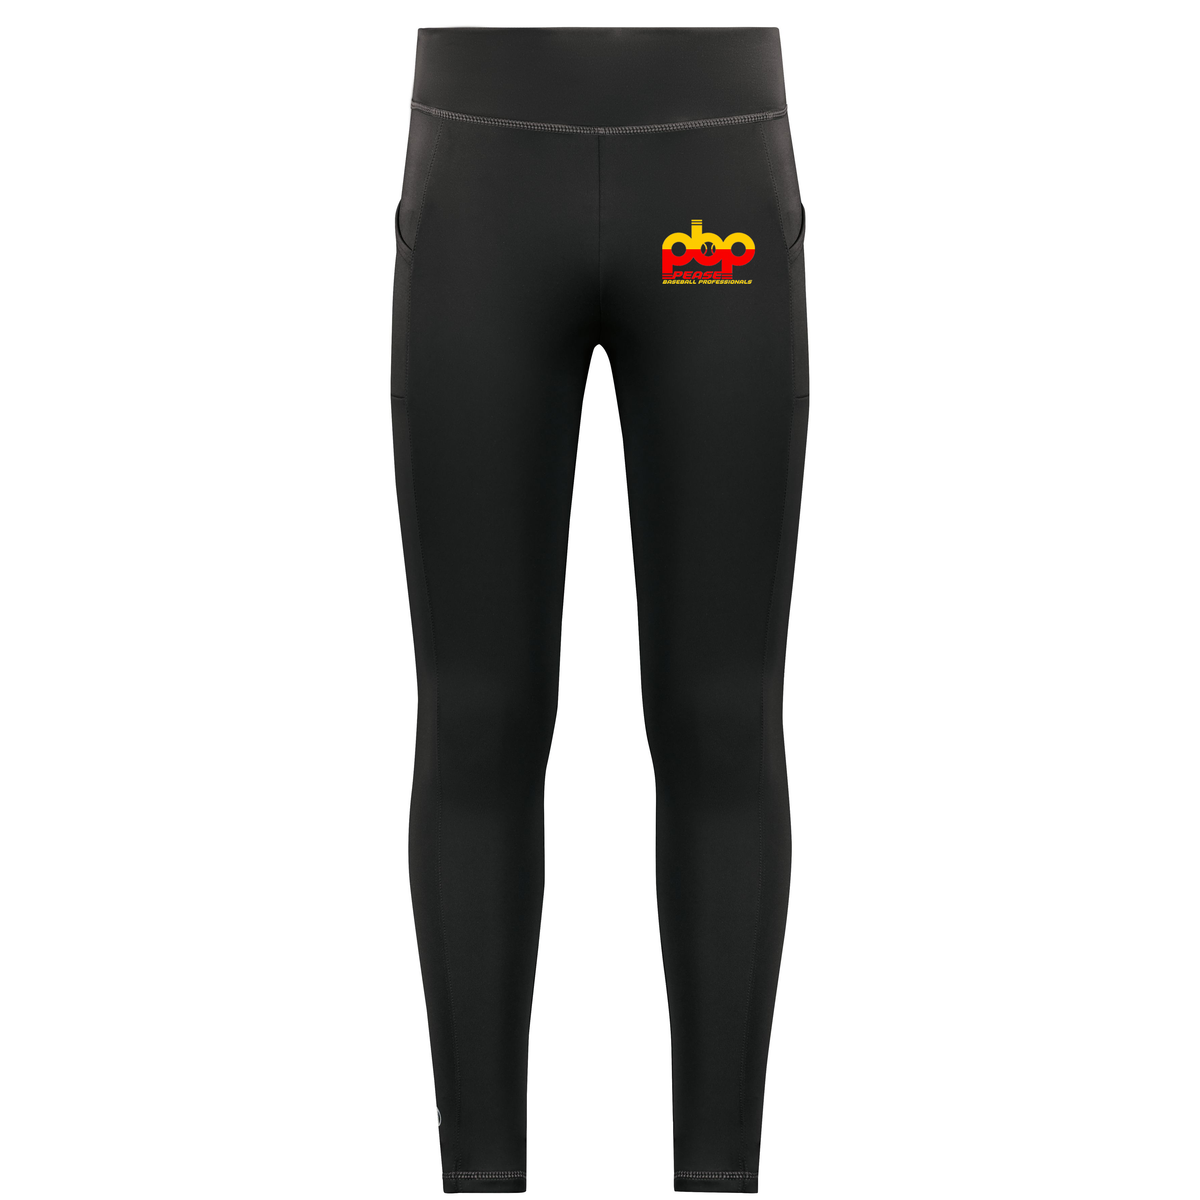 Pease Baseball Professionals Ladies Coolcore Tights